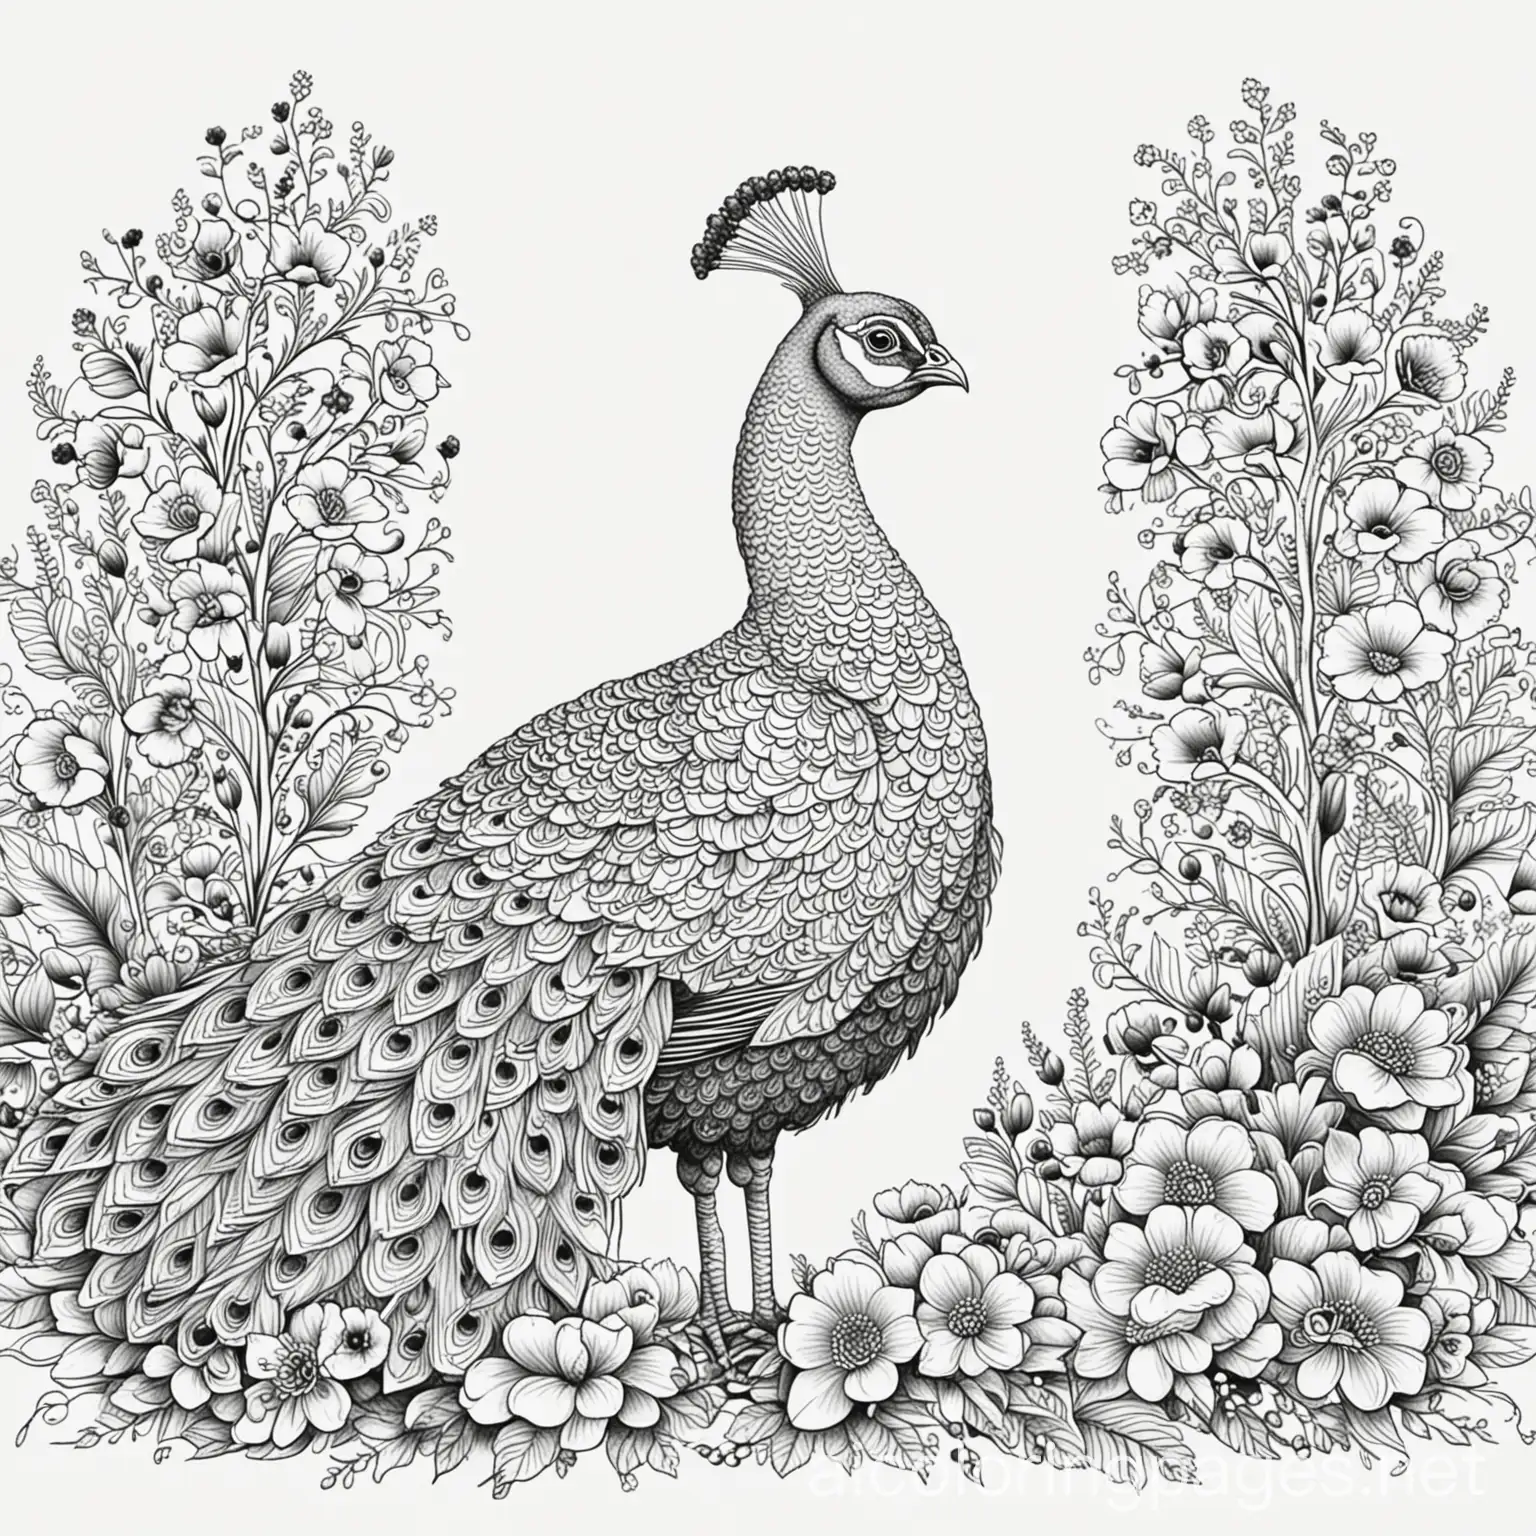 Peacock amid flowers, Coloring Page, black and white, line art, white background, Simplicity, Ample White Space. The background of the coloring page is plain white to make it easy for young children to color within the lines. The outlines of all the subjects are easy to distinguish, making it simple for kids to color without too much difficulty